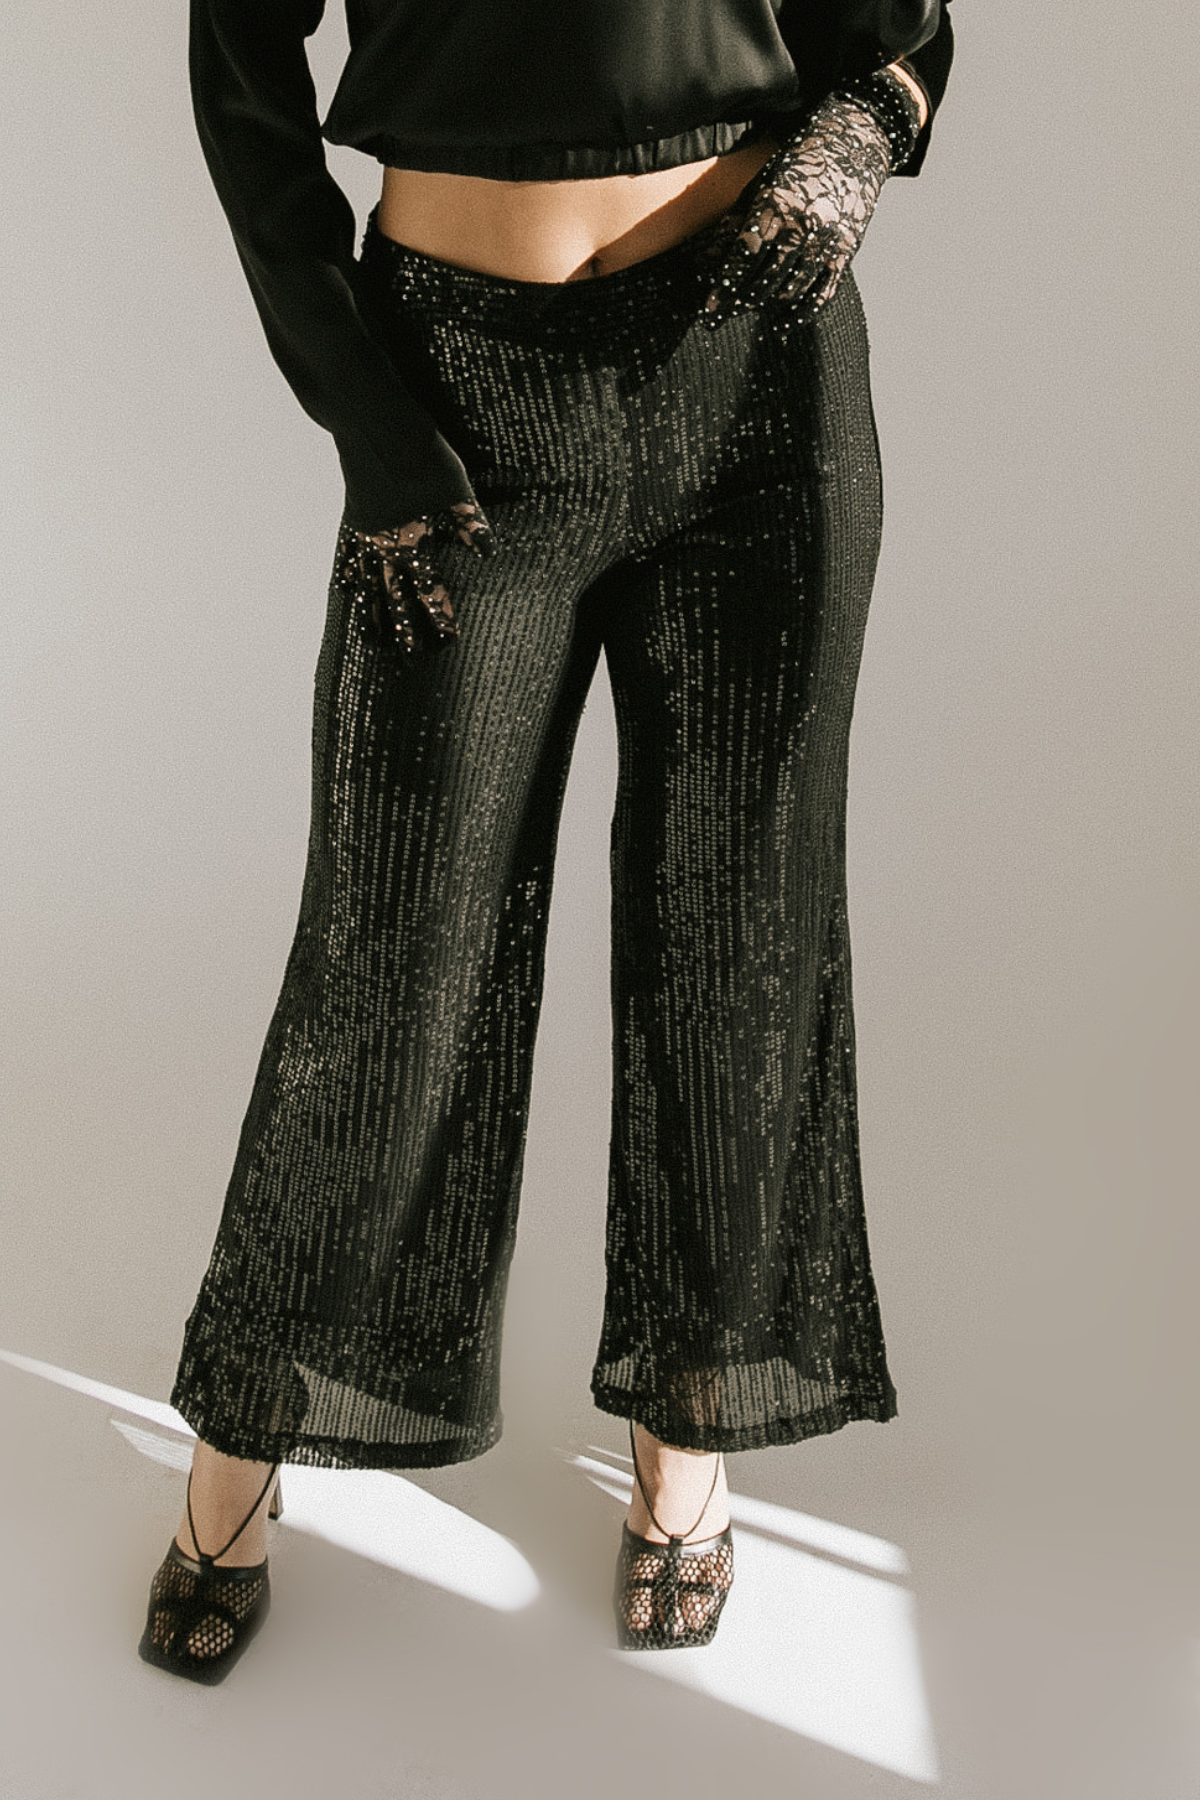 Move On Up Sequin Pant - Black